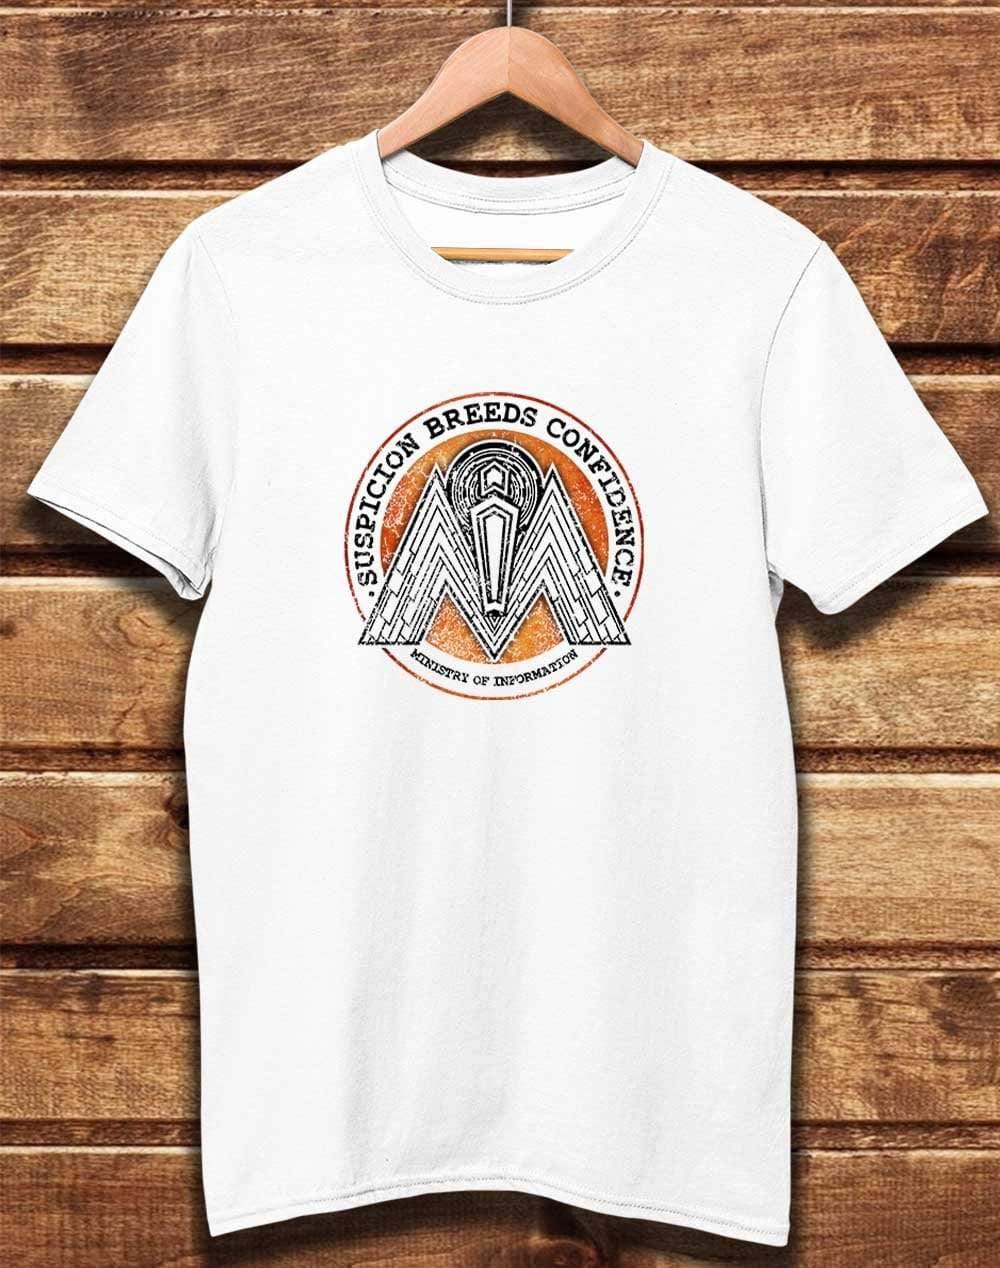 DELUXE Ministry of Information Organic Cotton T-Shirt XS / White  - Off World Tees